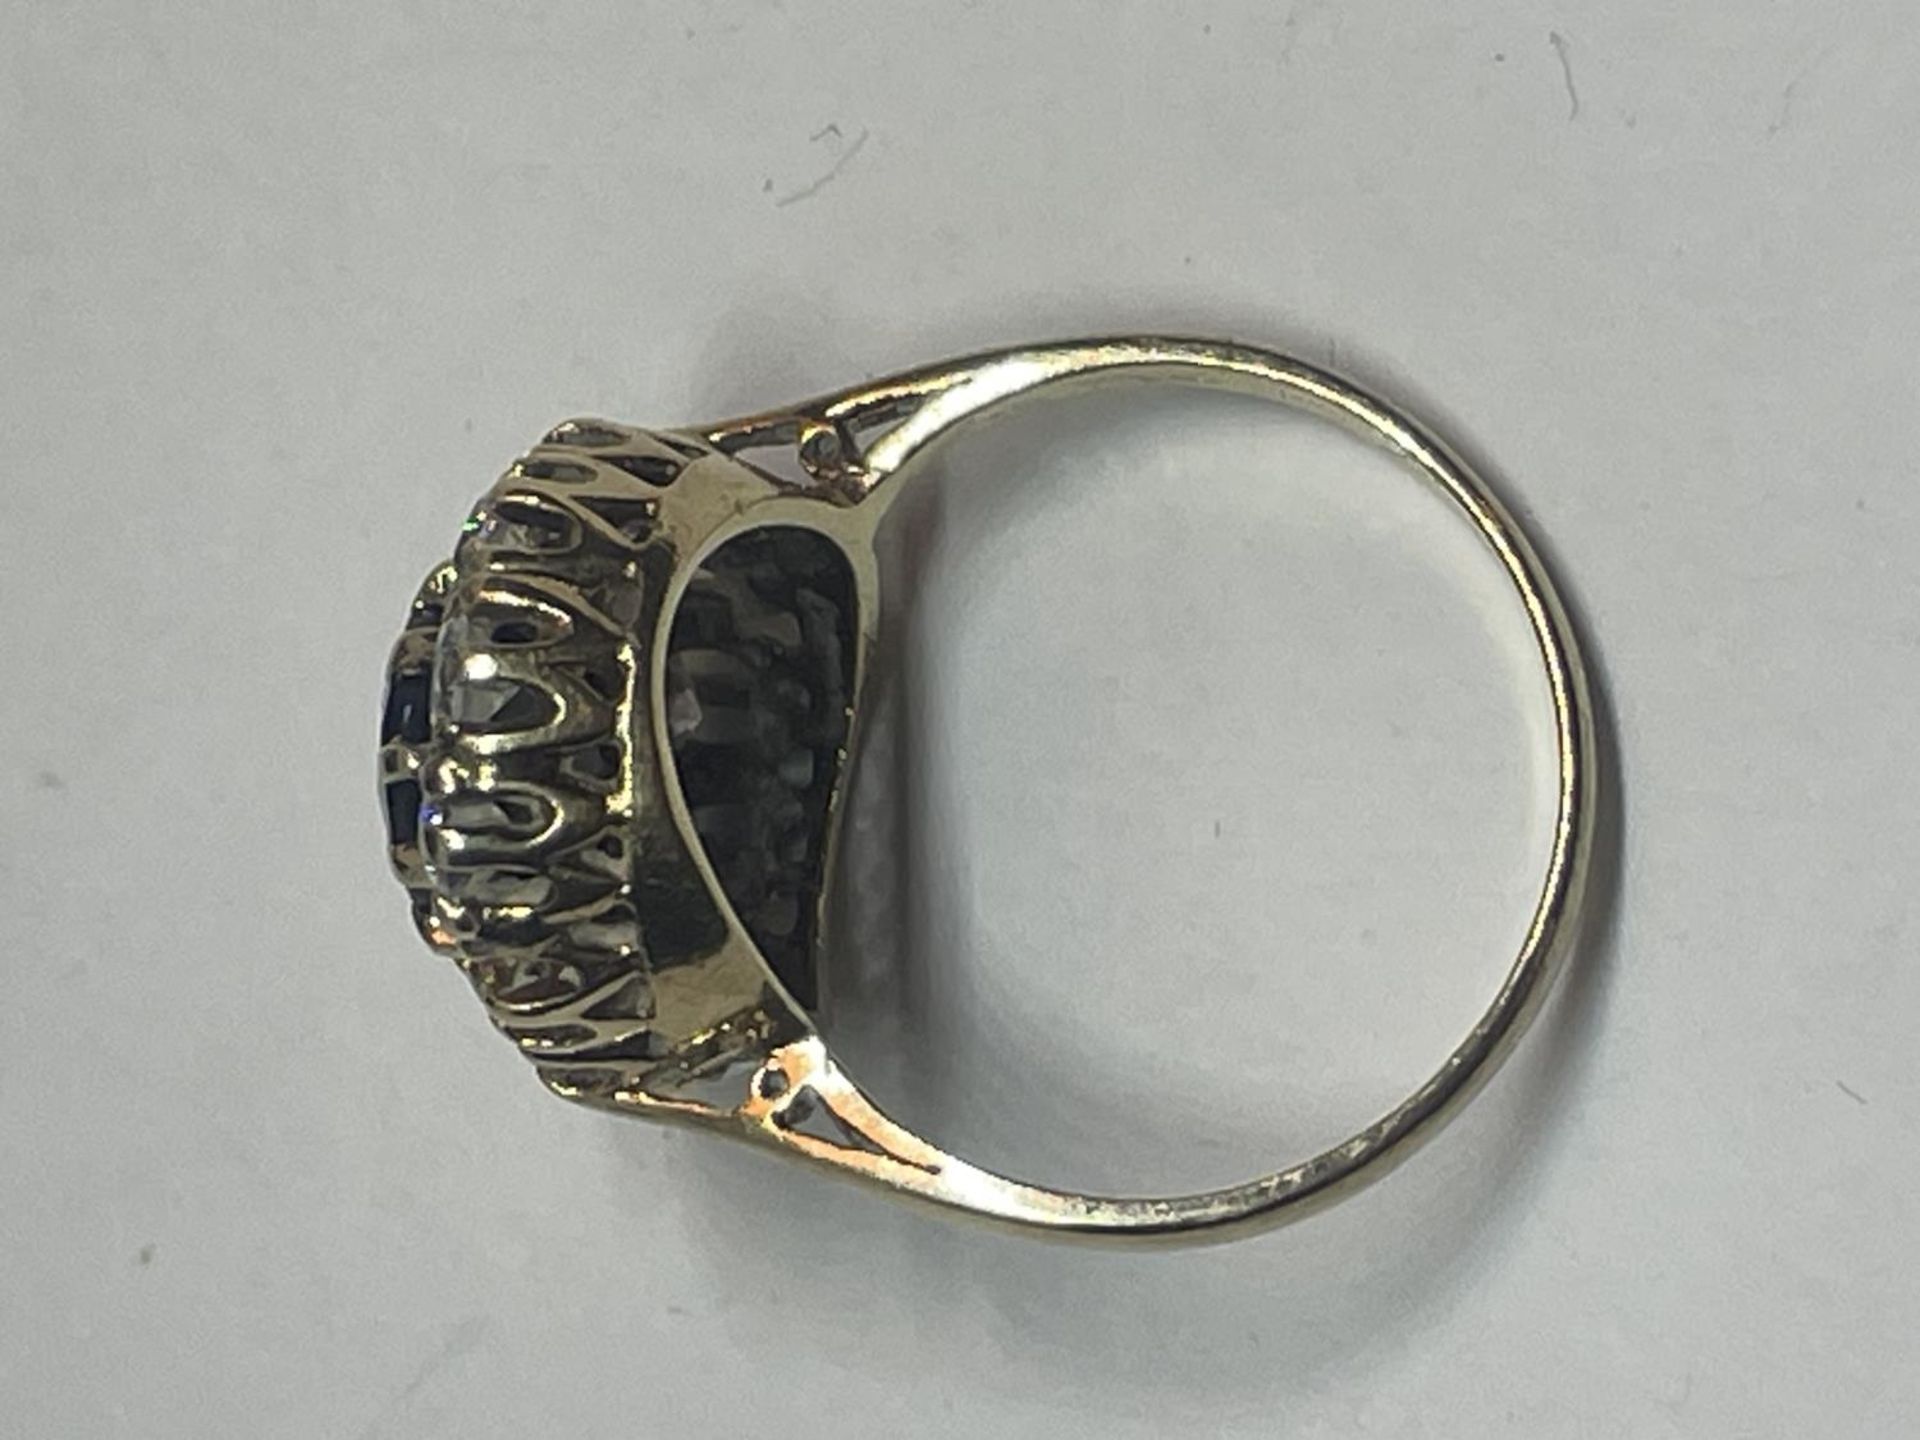 A 9 CARAT GOLD DRESS RING WITH CENTRE BLUE STONE SURROUNDED BY CUBIC ZIRCONIAS SIZE Q IN A - Image 5 of 5